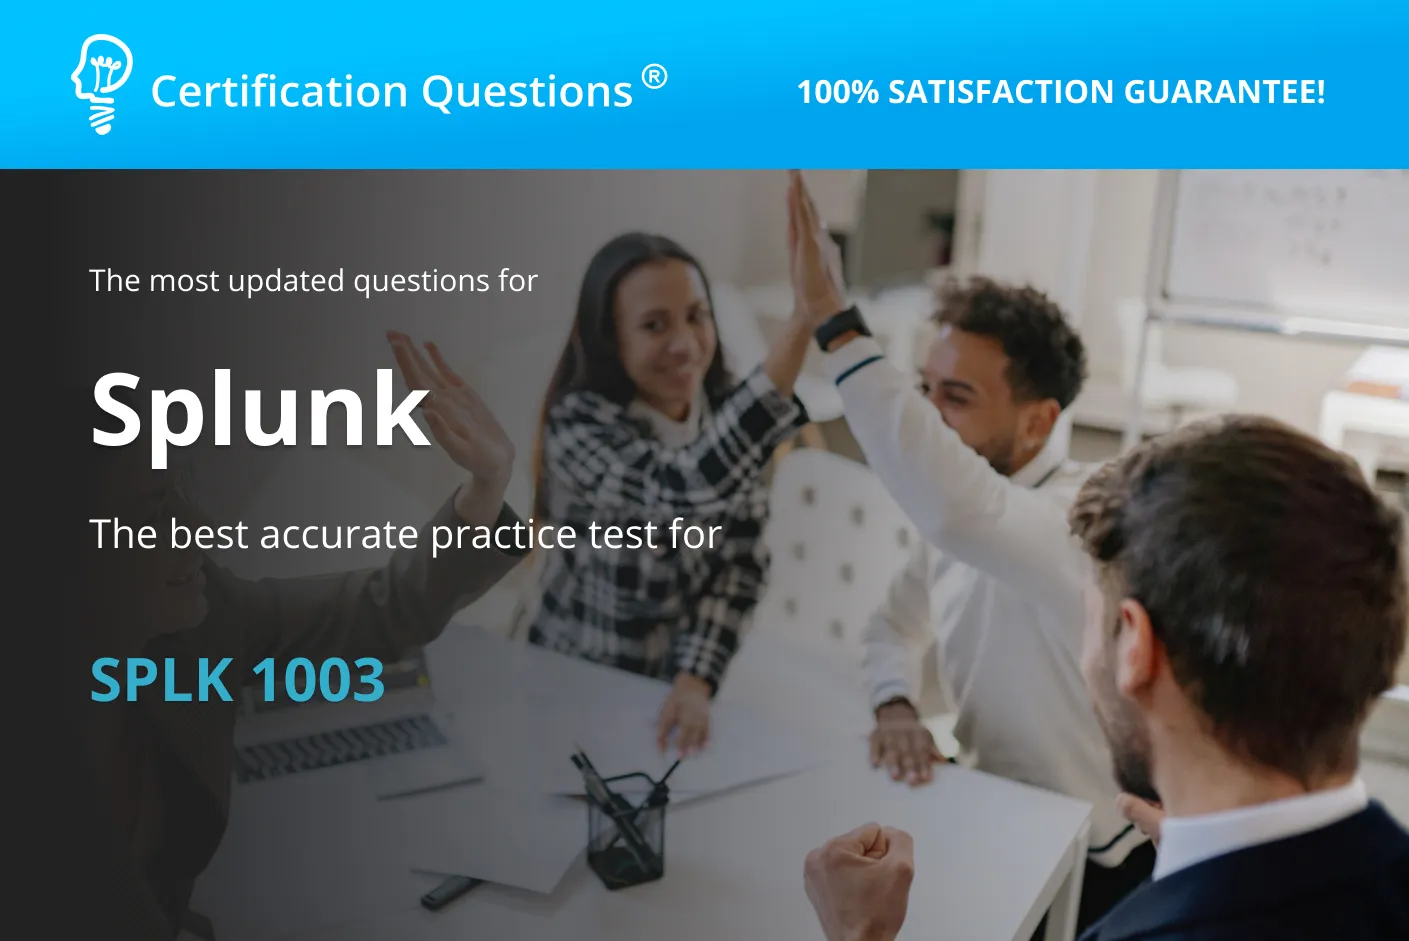 This image is related to the Splunk enterprise certified admin exam questions in the USA.